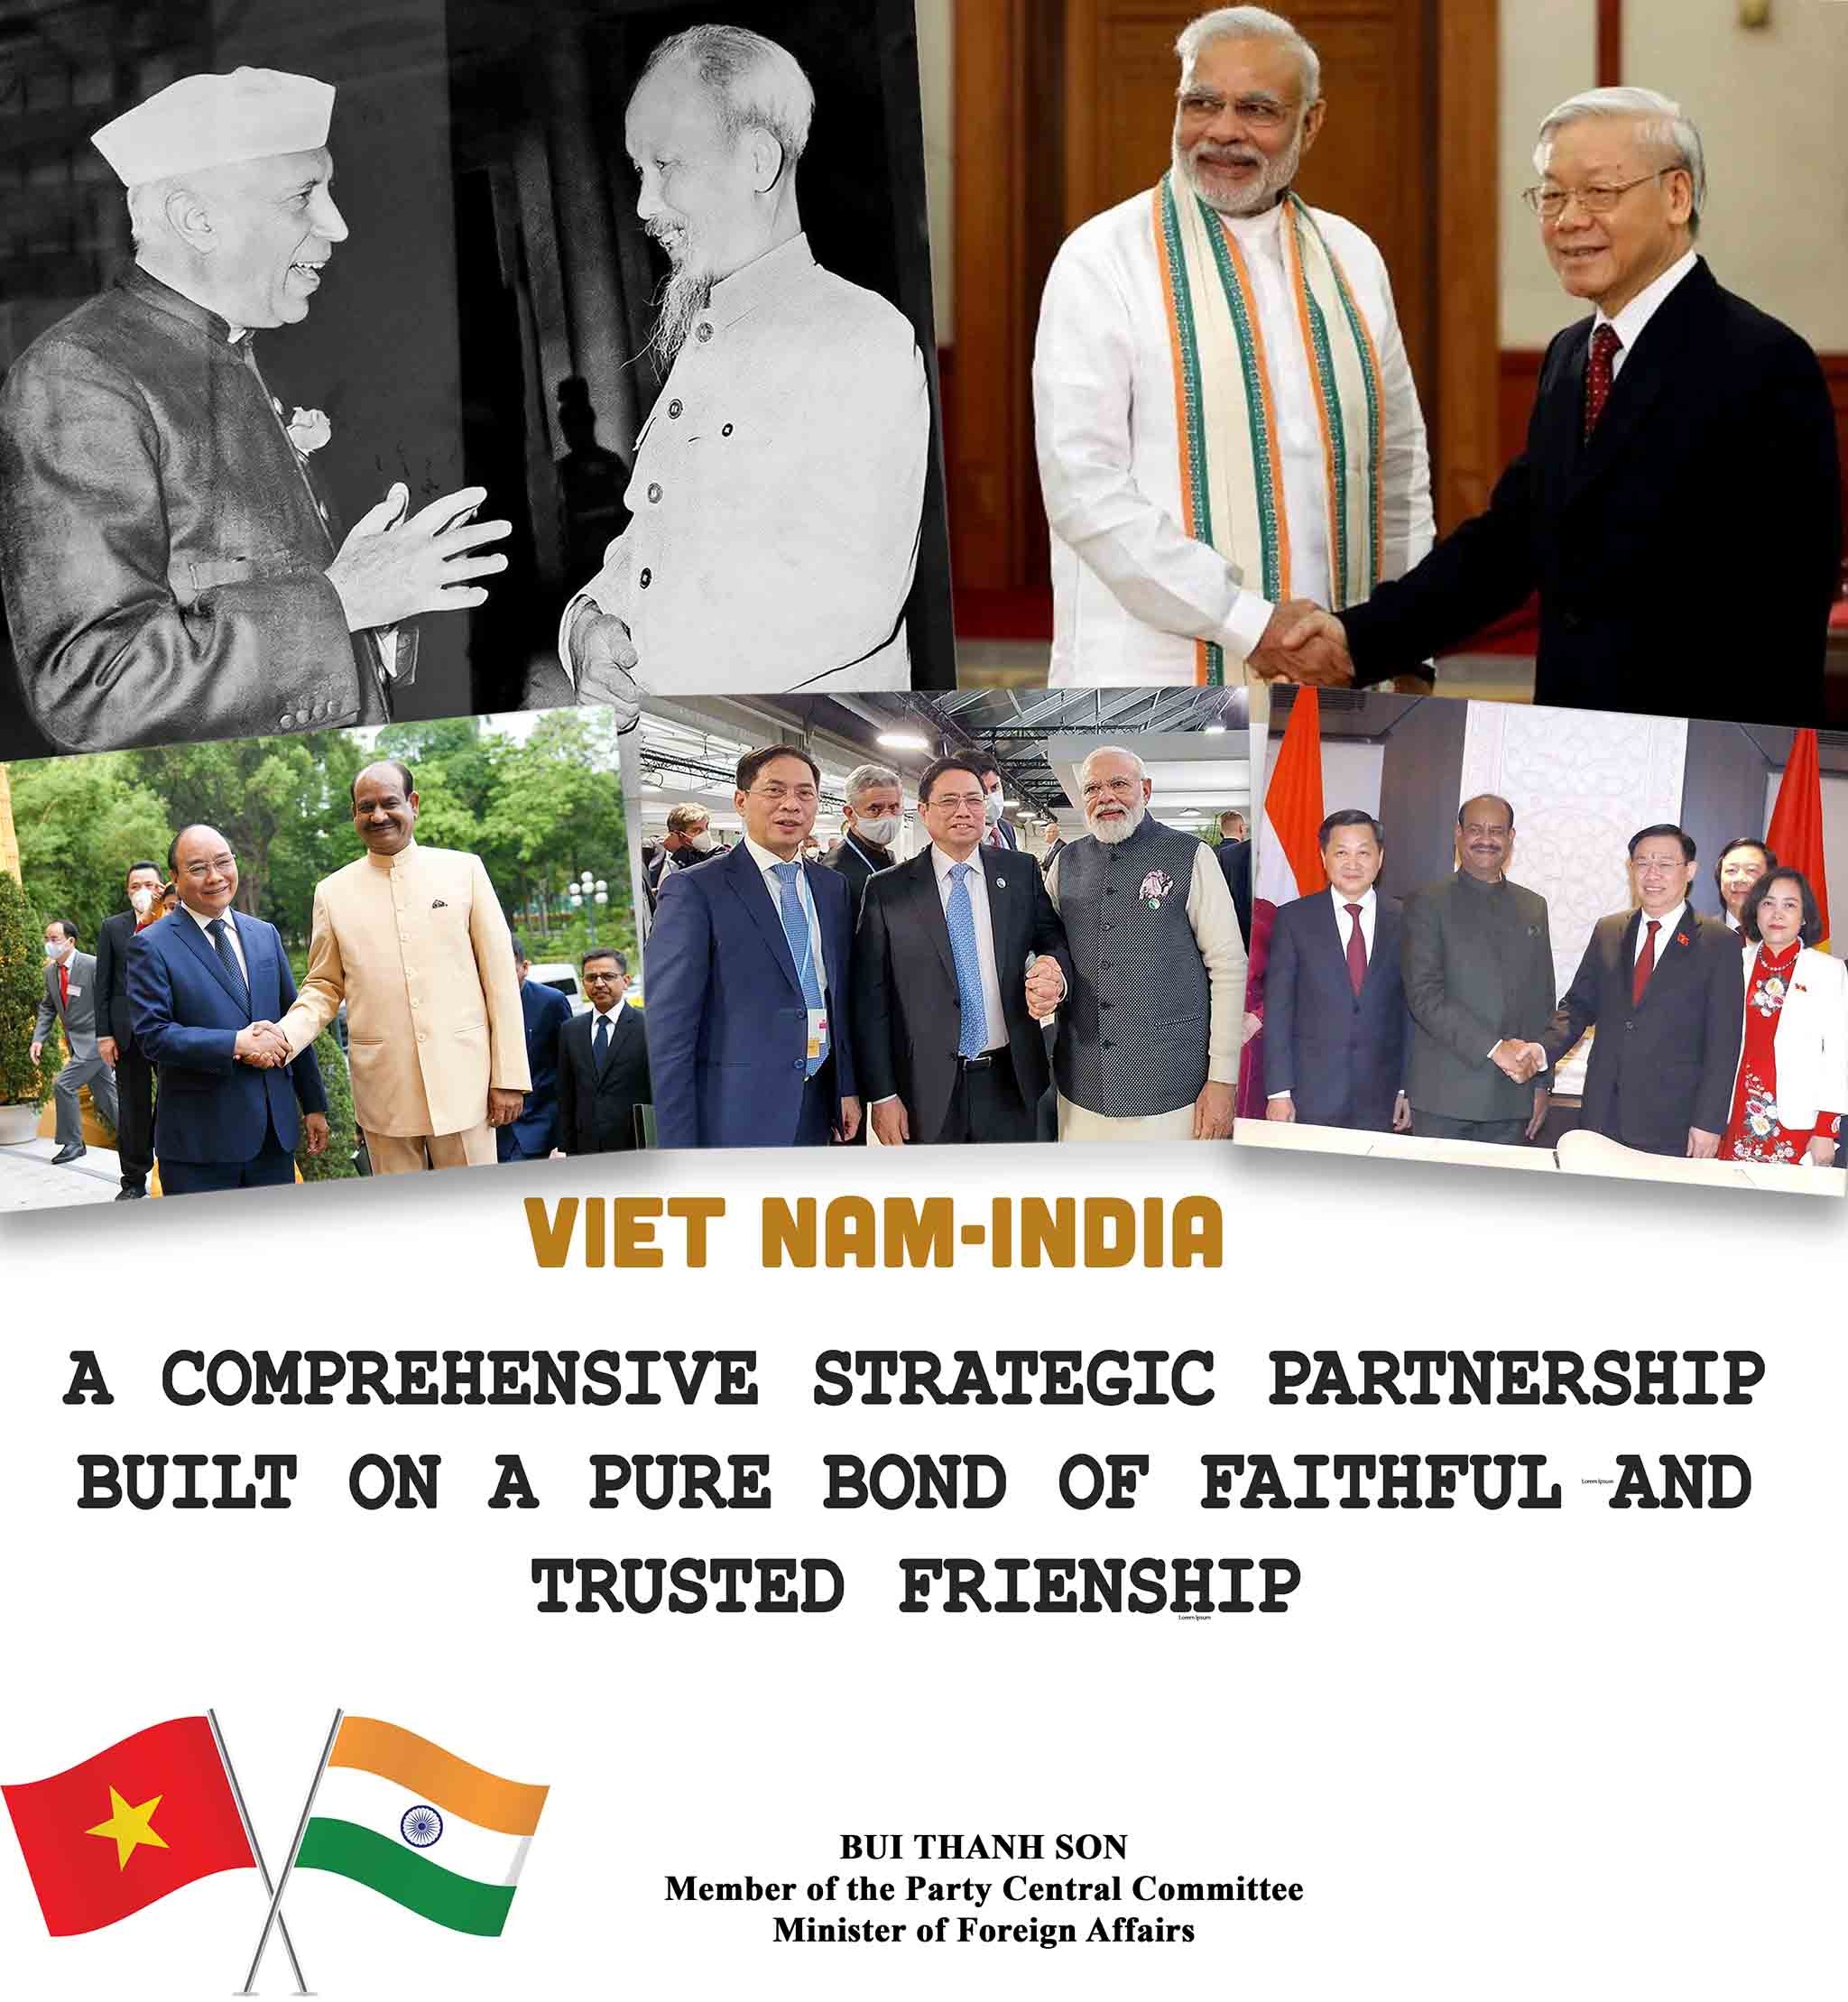 Viet nam - India: A comprehensive strategic partnership  Built on a pure bond of faithful and trusted frienship